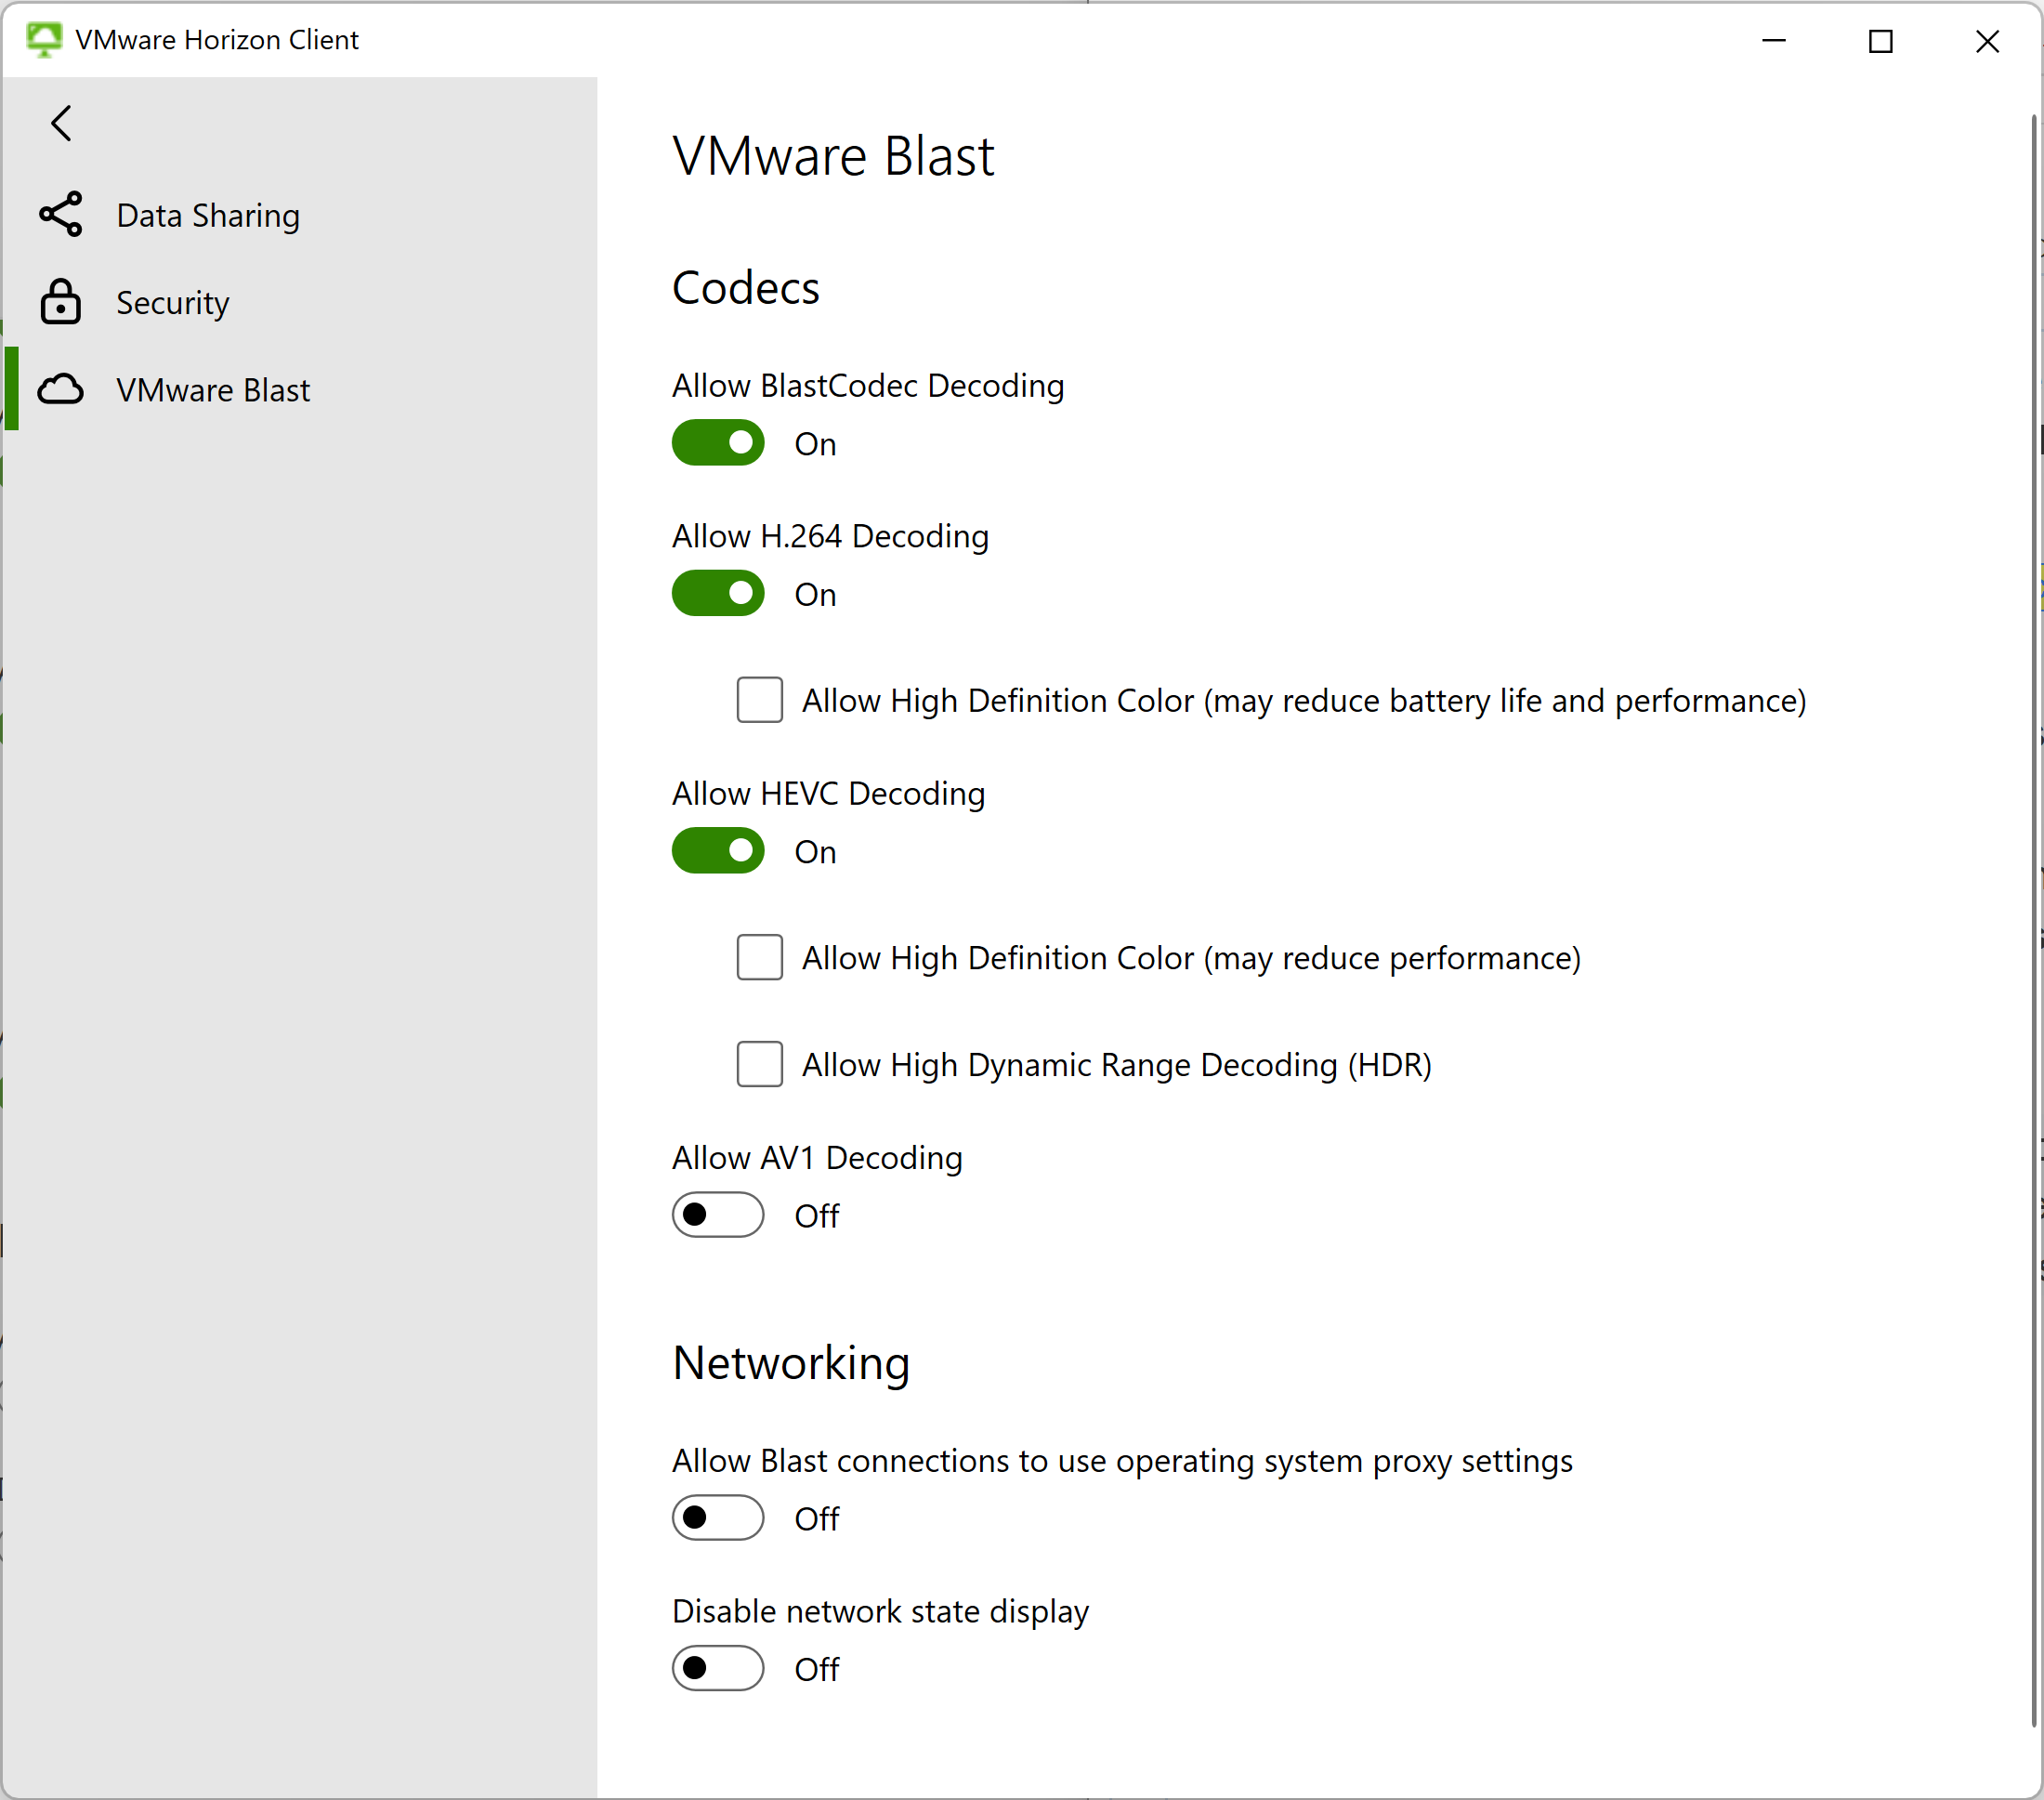 The VMware Blast settings include controls for displaying network notifications